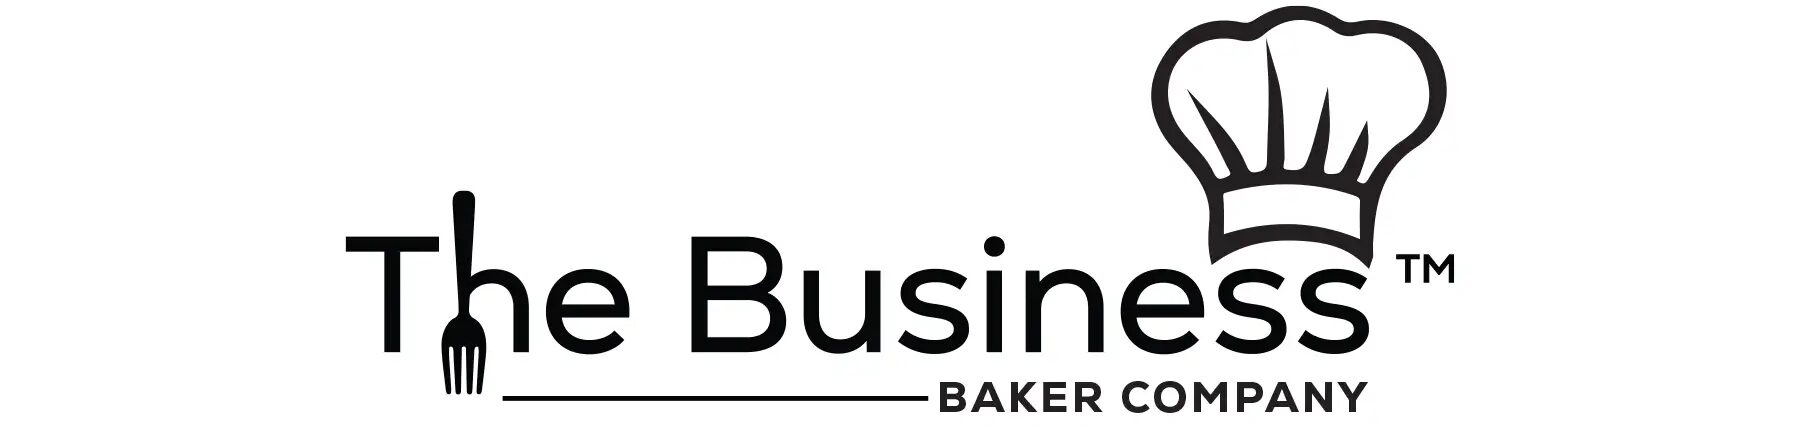 The Business Baker Company